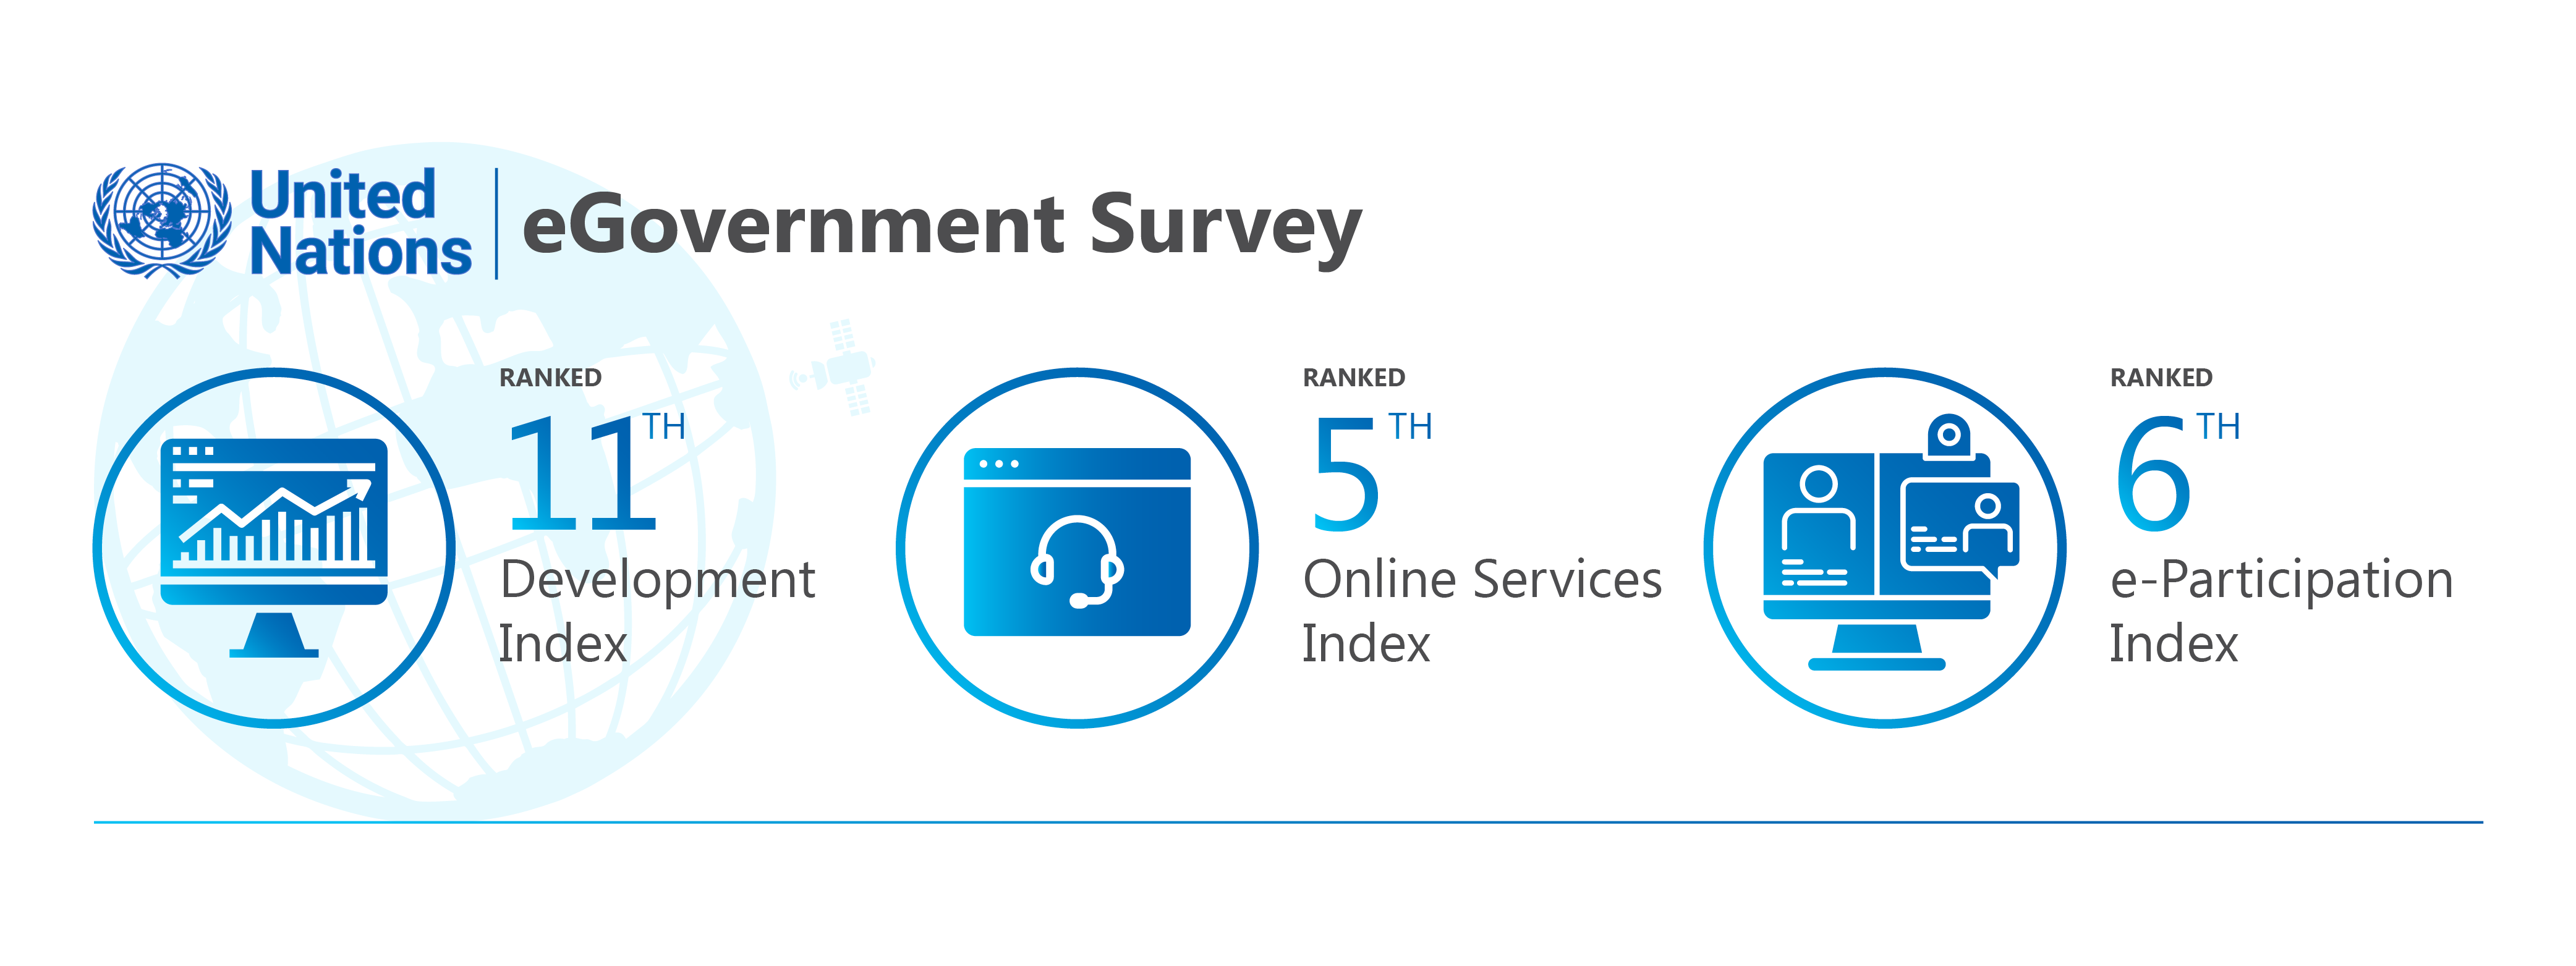 Fig 2: Singapore’s 2020 United Nations e-Government Ranking